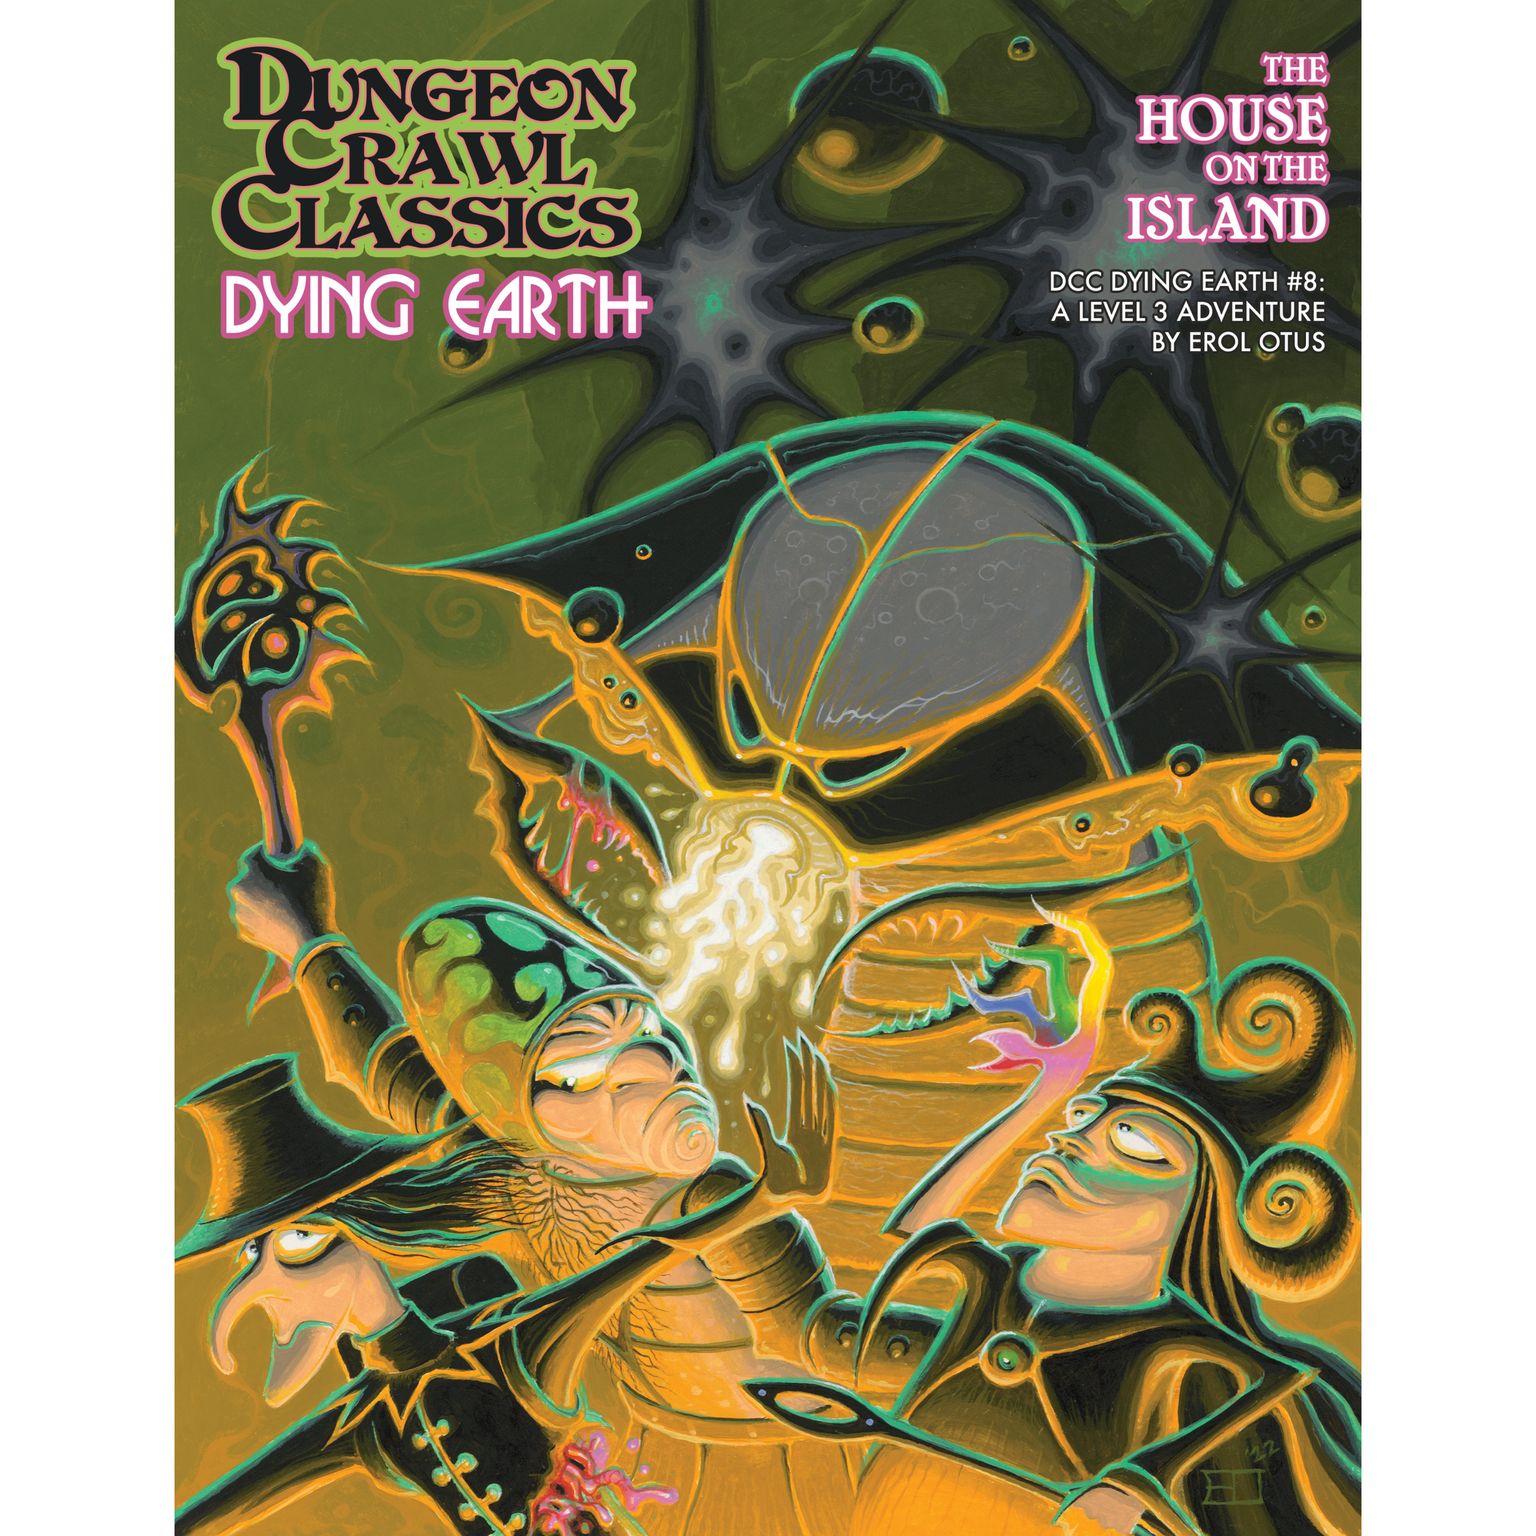 Dungeon Crawl Classics: Dying Earth #8: The House On The Island 